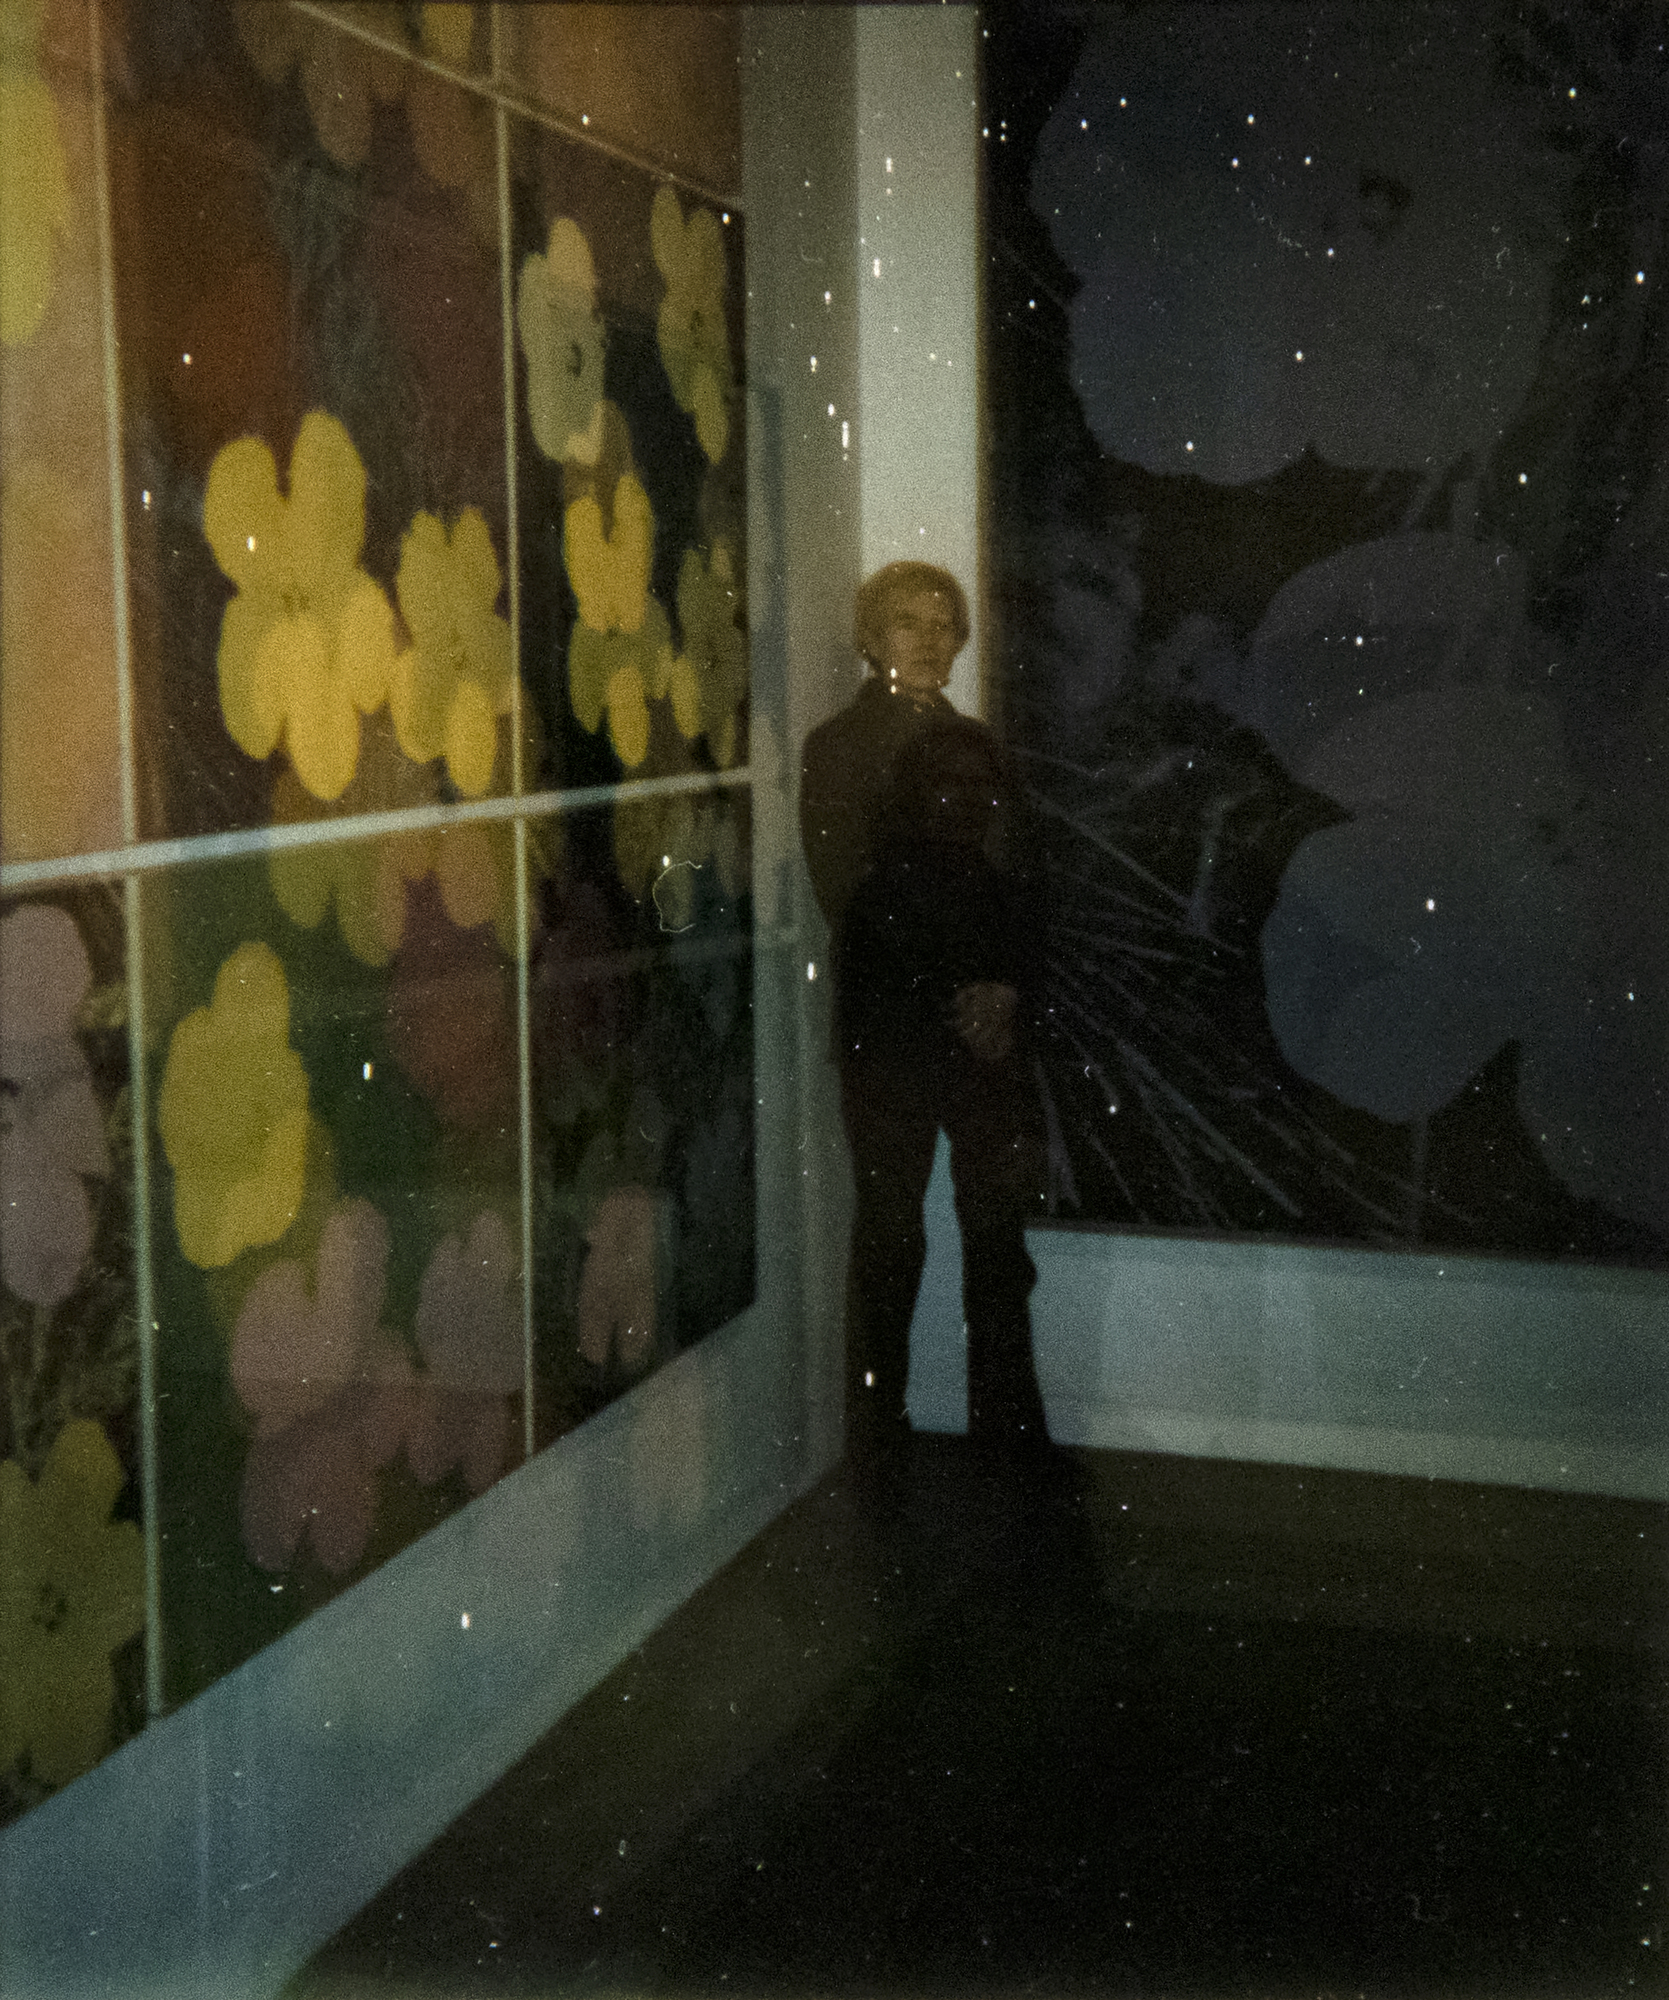 ANDY WARHOL - Self Portrait at 'Flowers' Exhibition - Polaroid, Polacolor - 4 1/4 x 3 3/8 in.